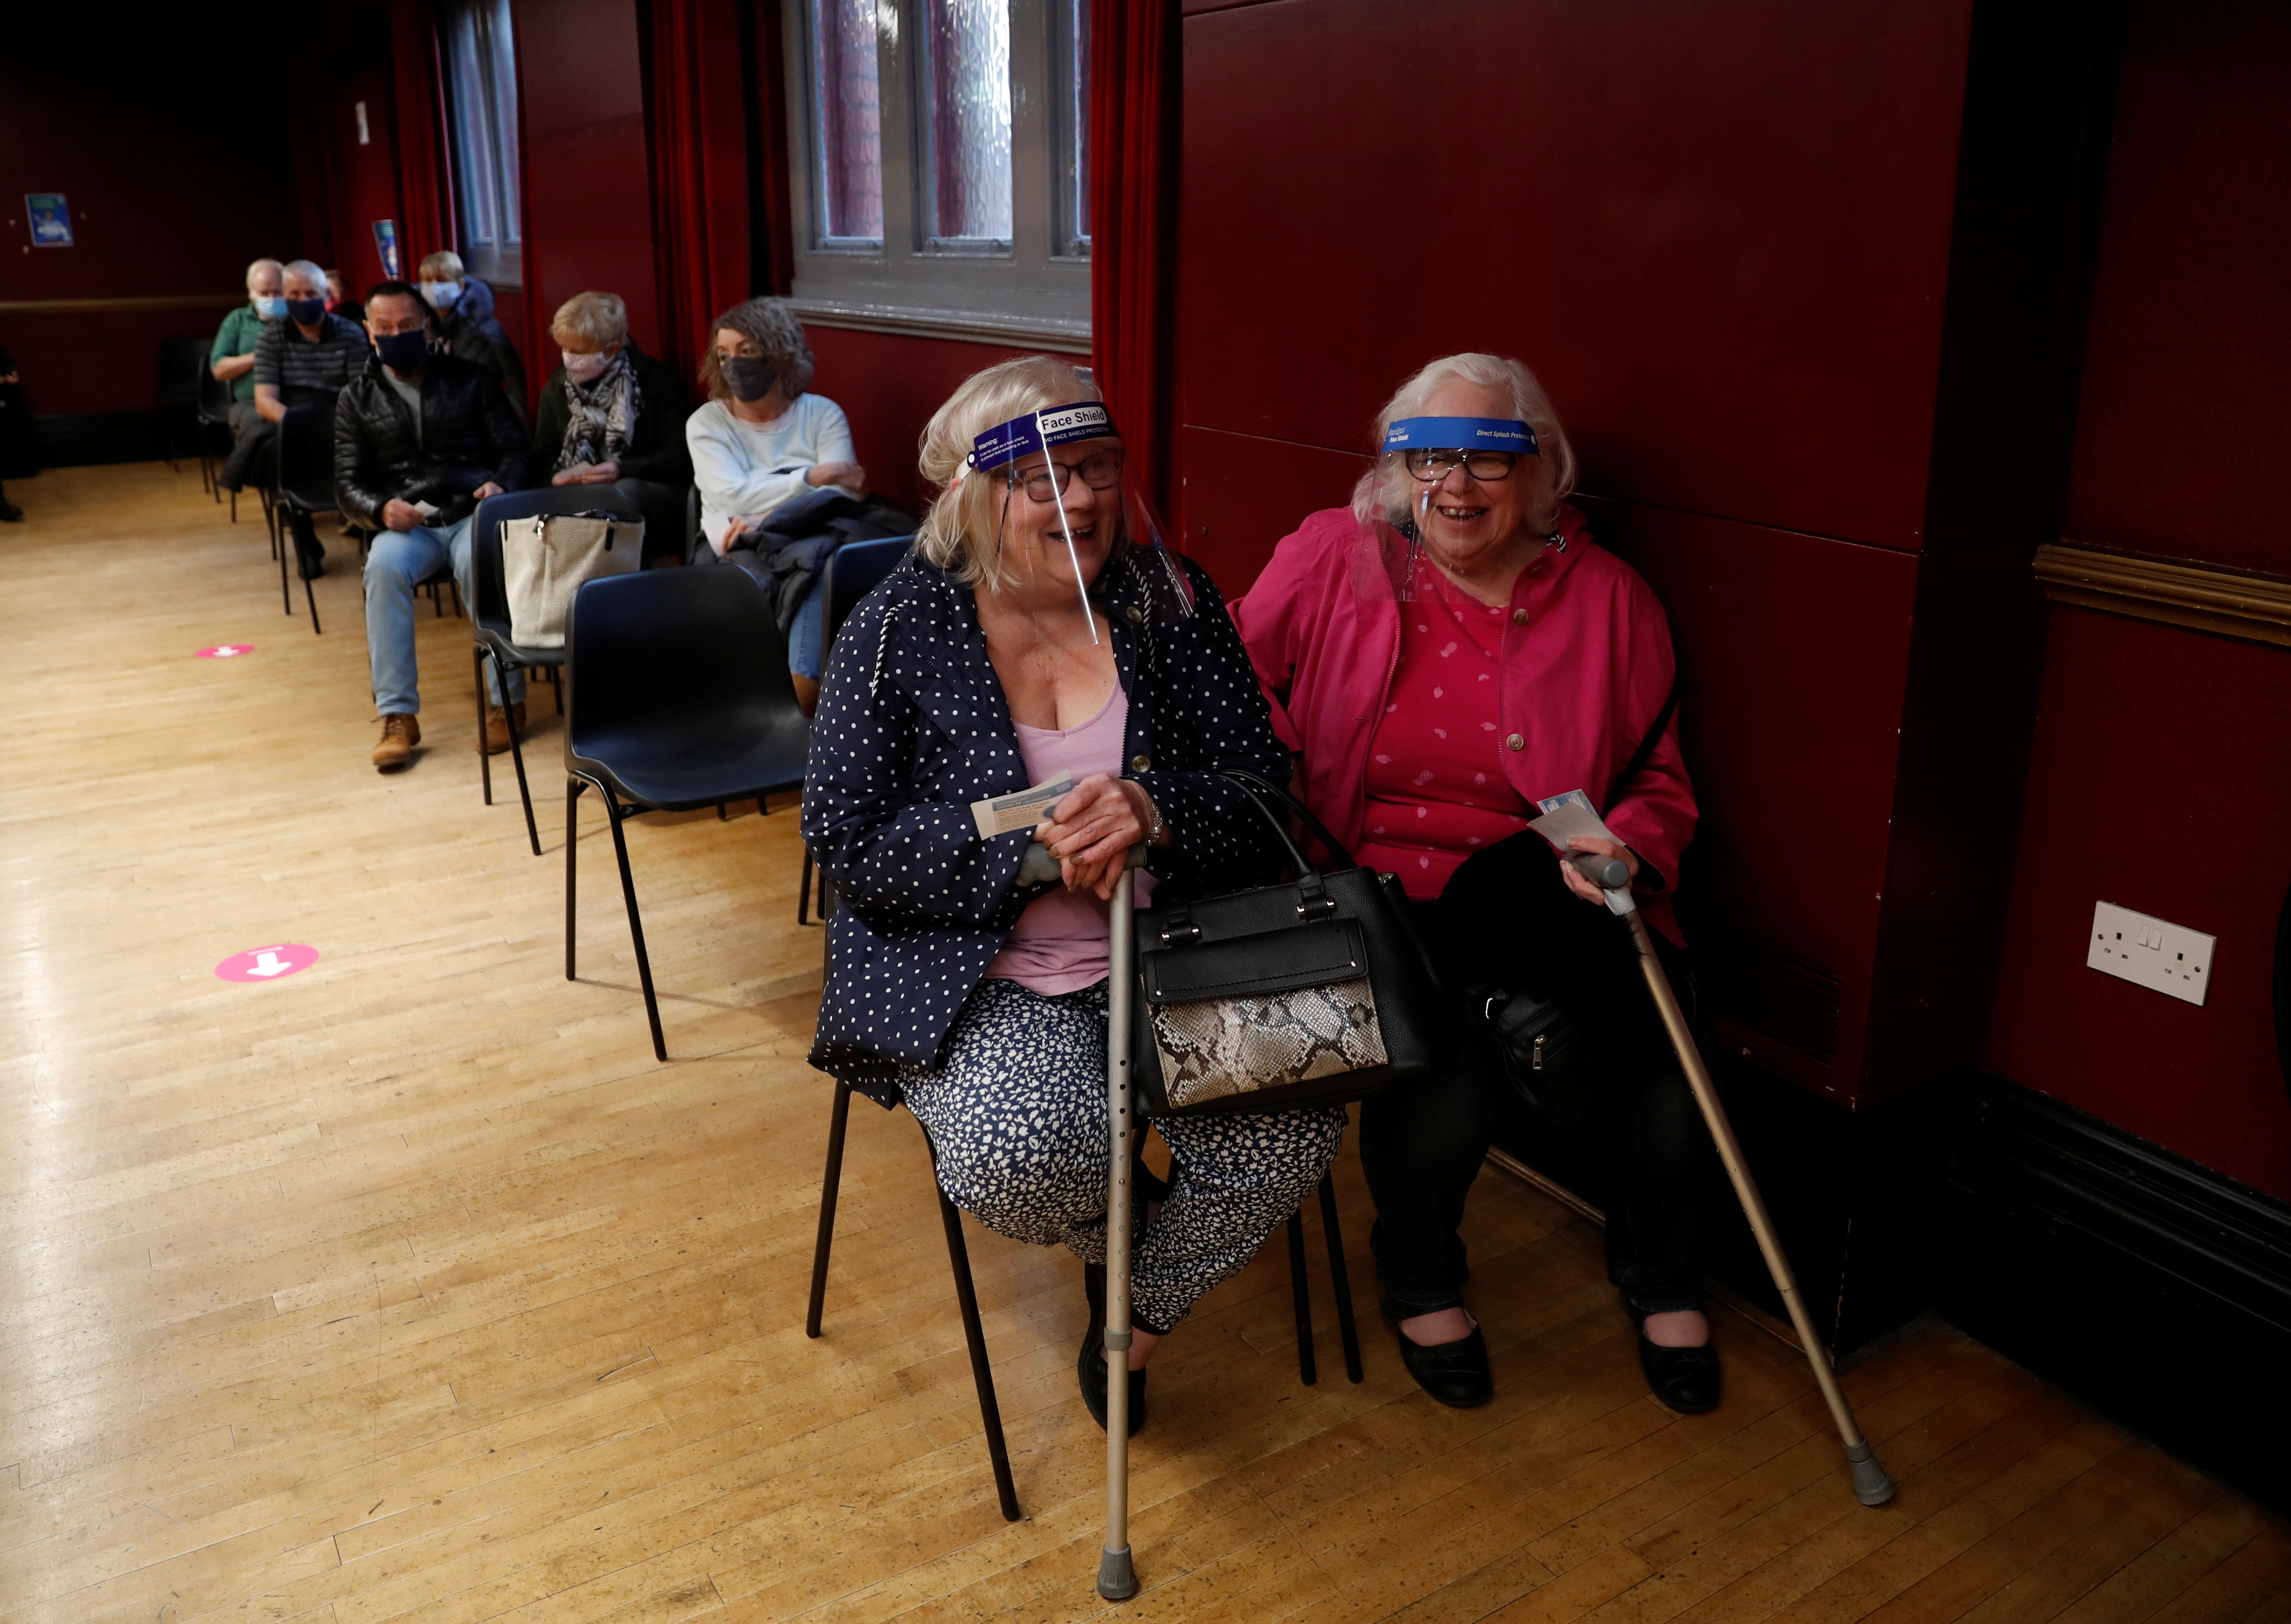 Patients wait for their vaccinations at the Hartlepool Town Hall Theatre vaccination centre, as the spread of the coronavirus disease (COVID-19) continues in Hartlepool